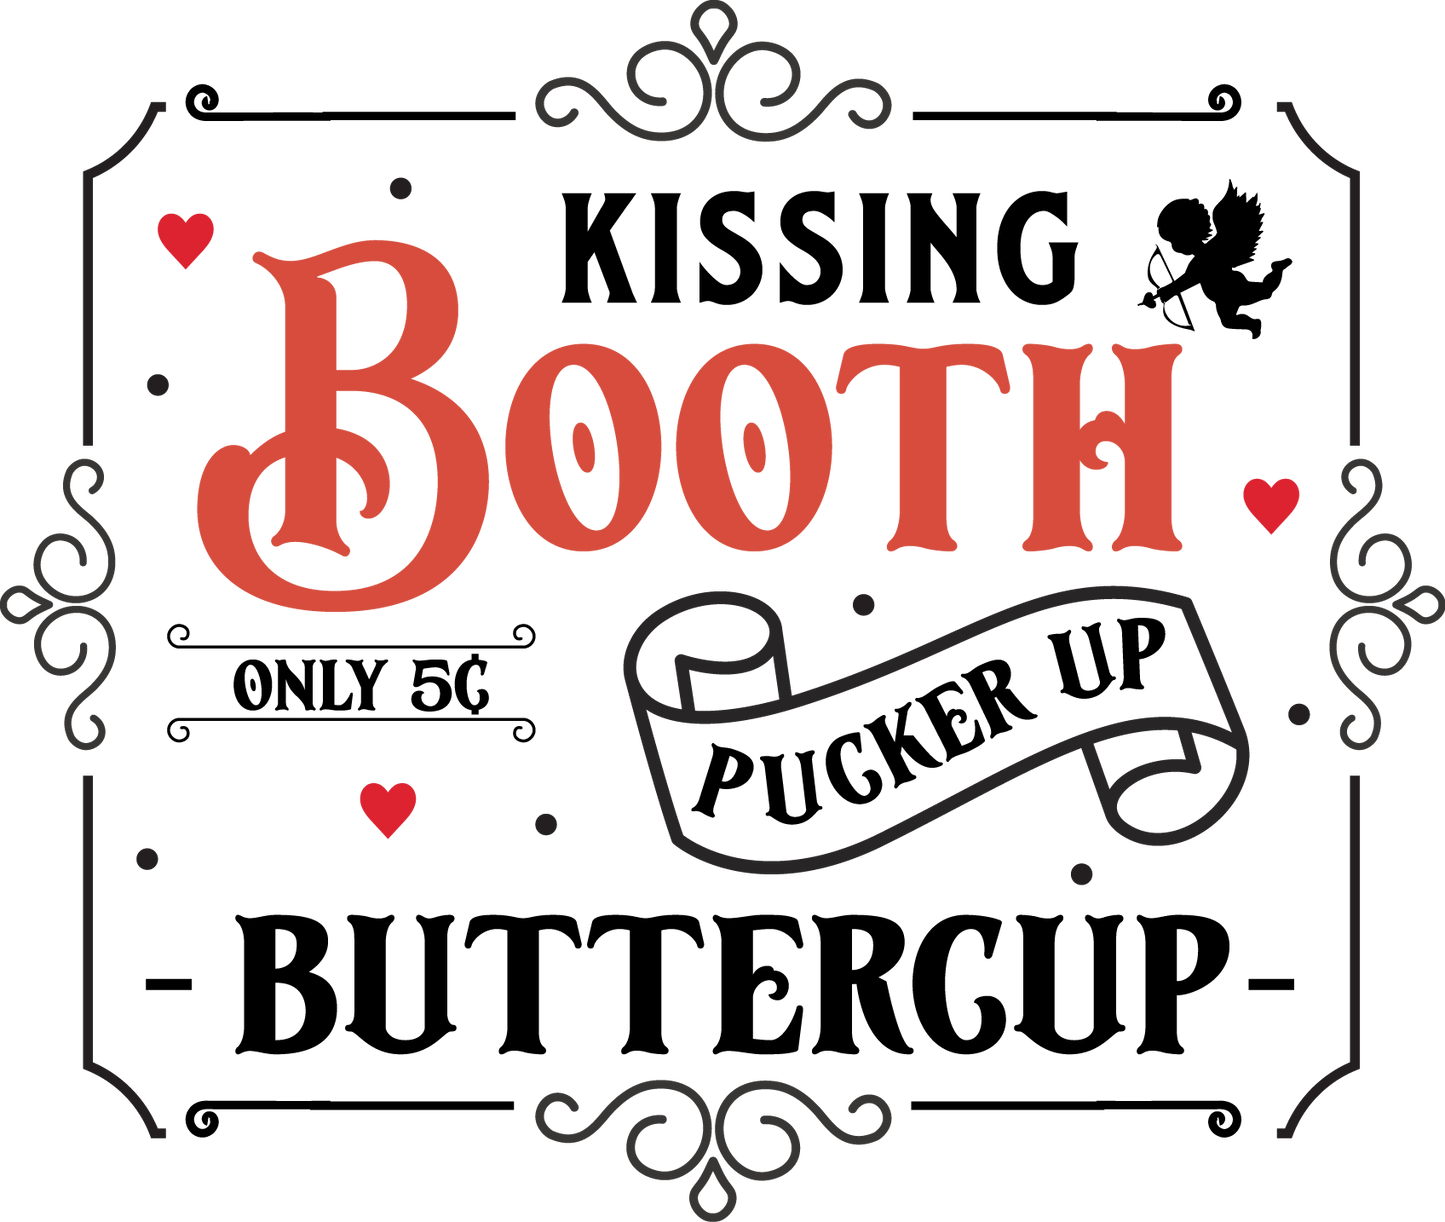 VALENTINE'S DAY PRINT 18 - KISSING BOOTH